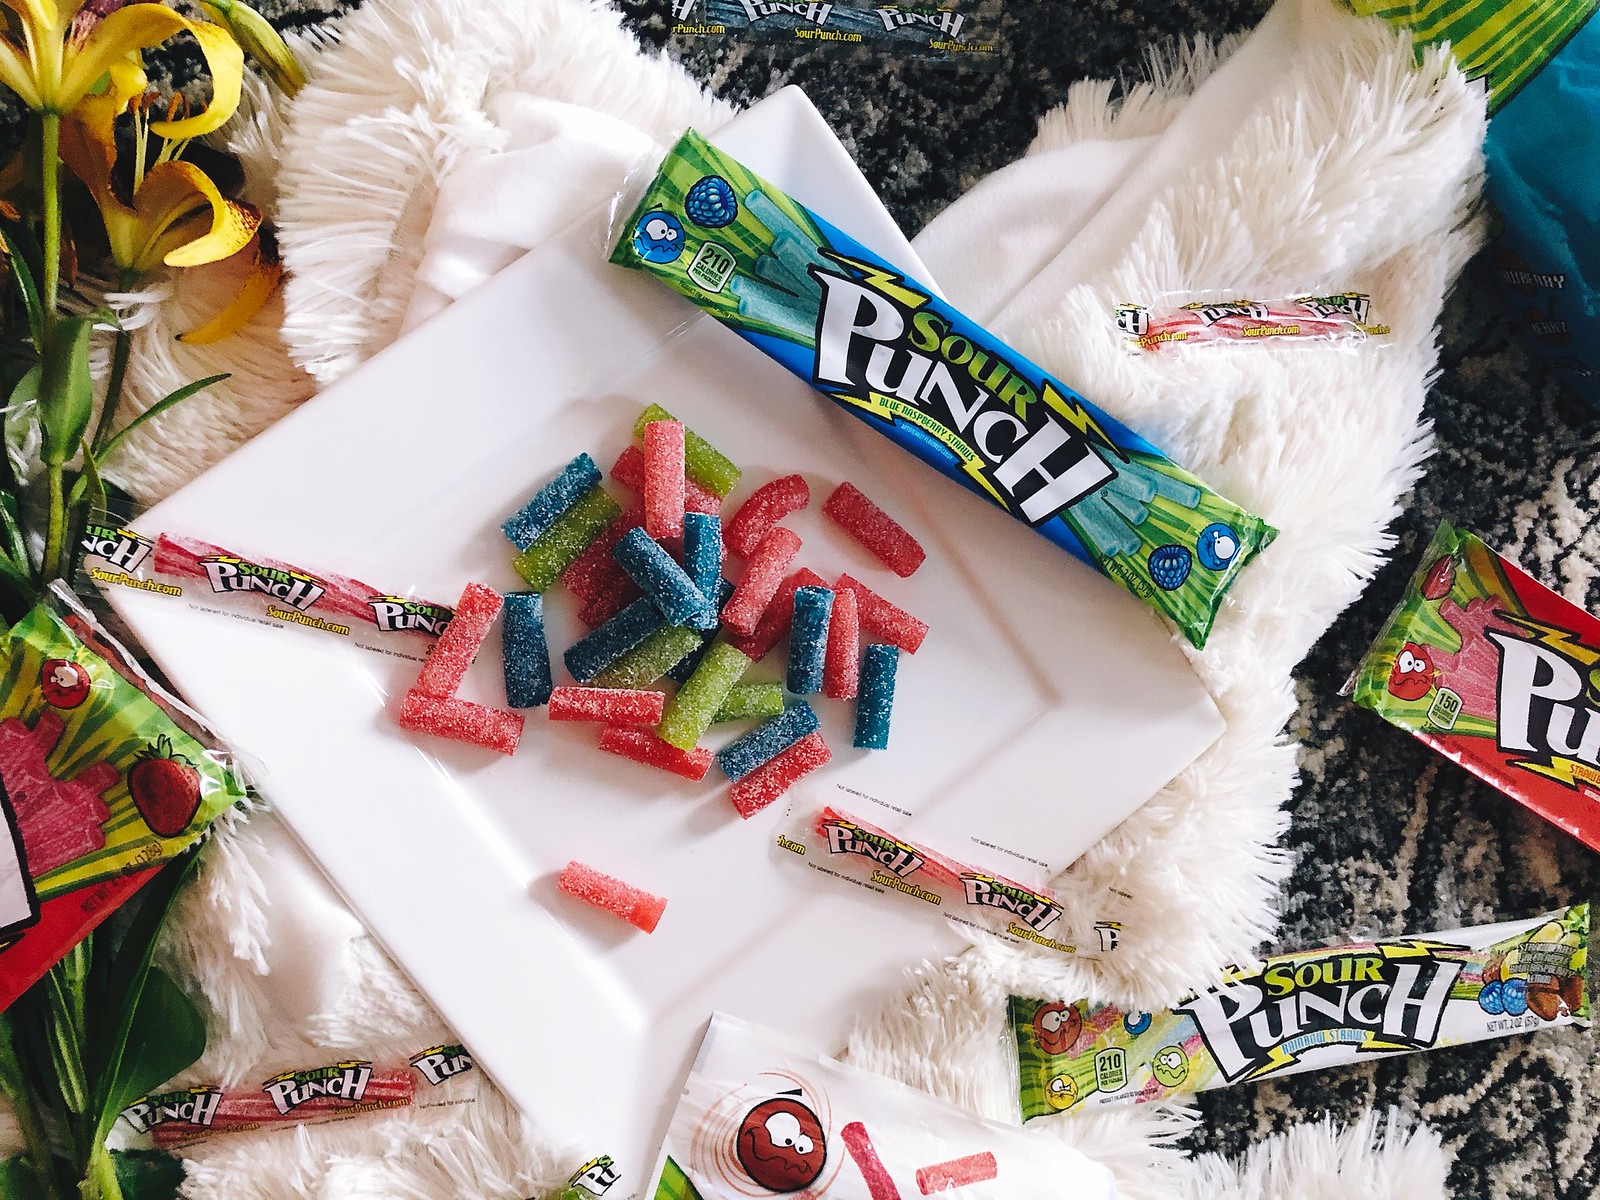 sour punch straws